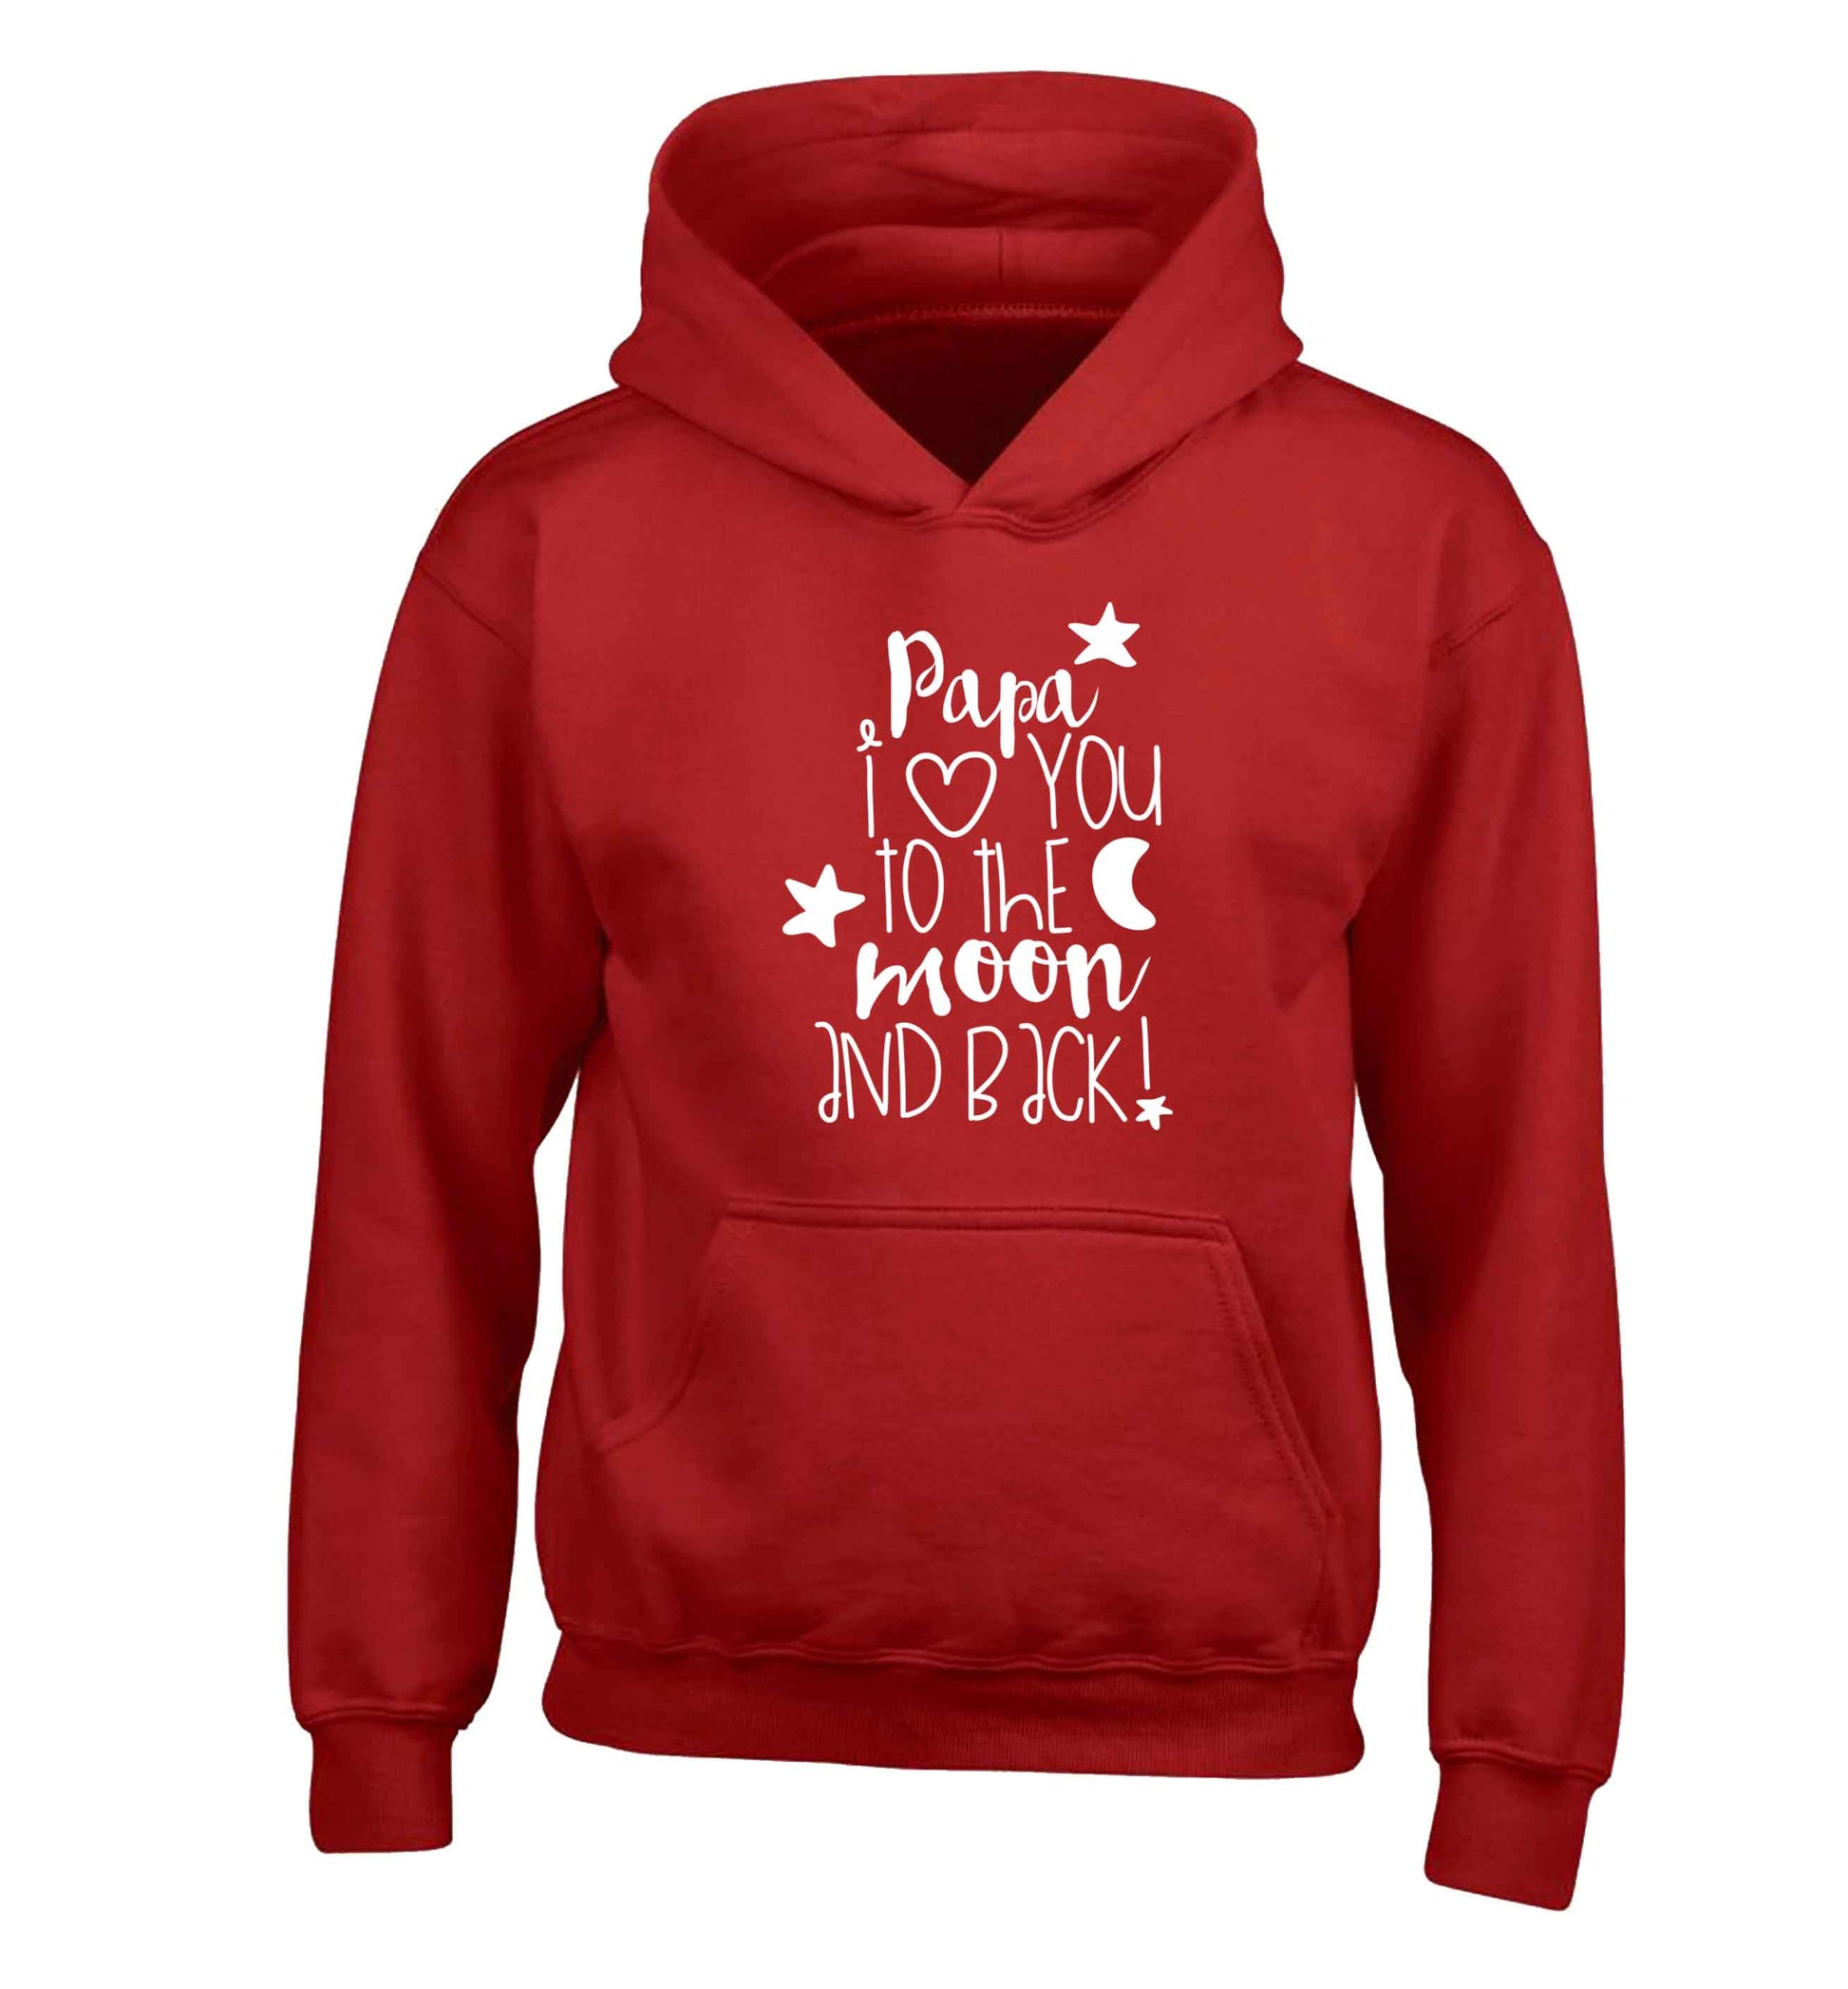 Papa I love you to the moon and back children's red hoodie 12-13 Years